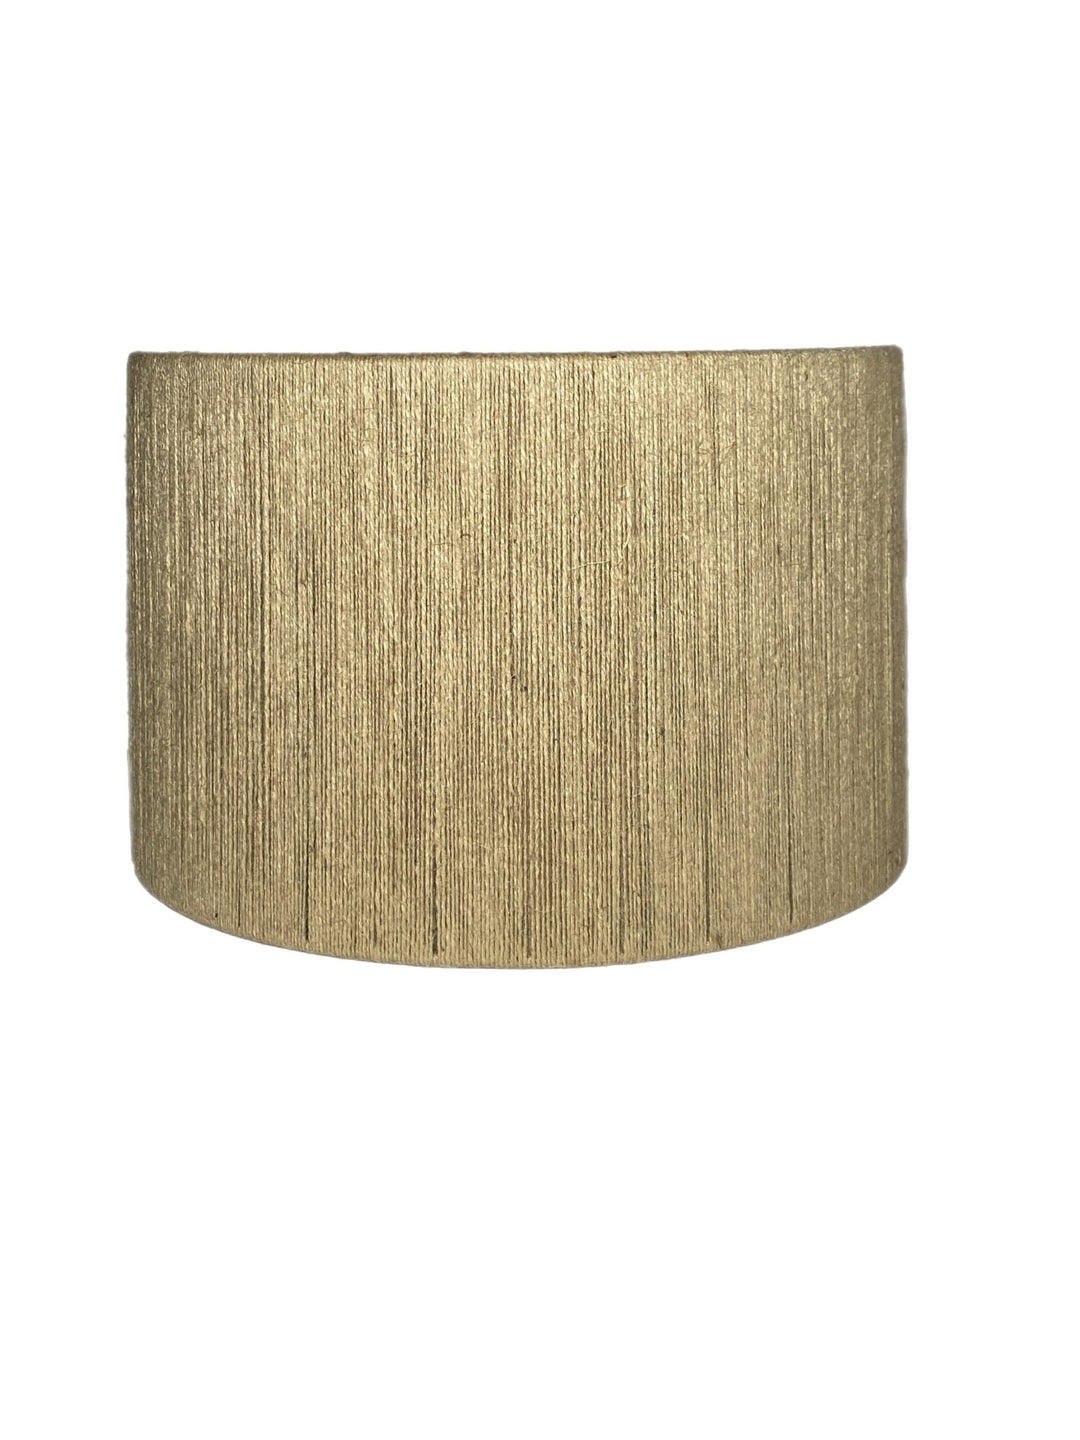 Jute String Drum Lamp shade - Multiple Sizes - Lux Lamp Shades